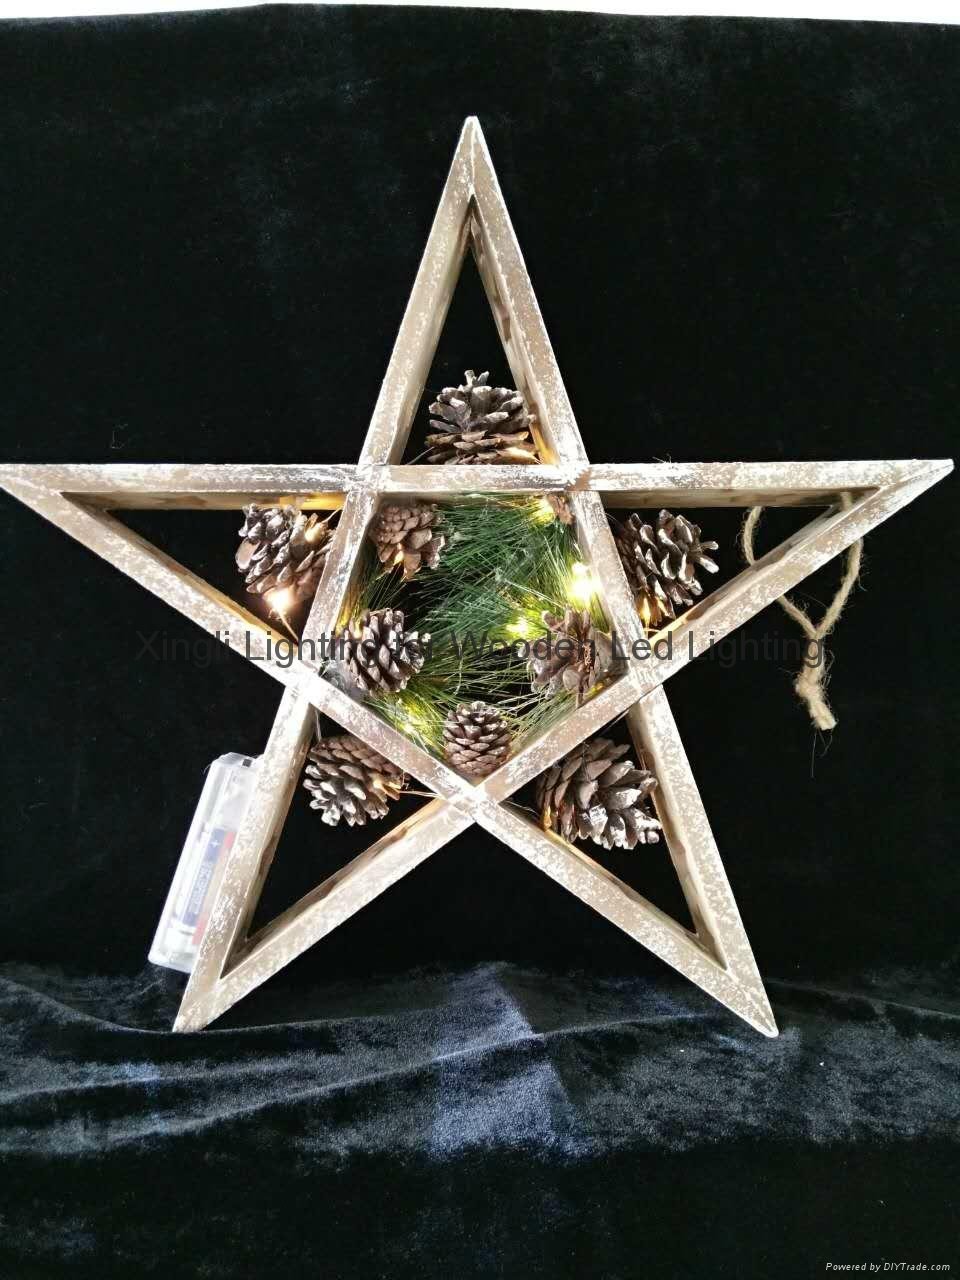 SH series home festival decoration wooden star light wooden crafts 5